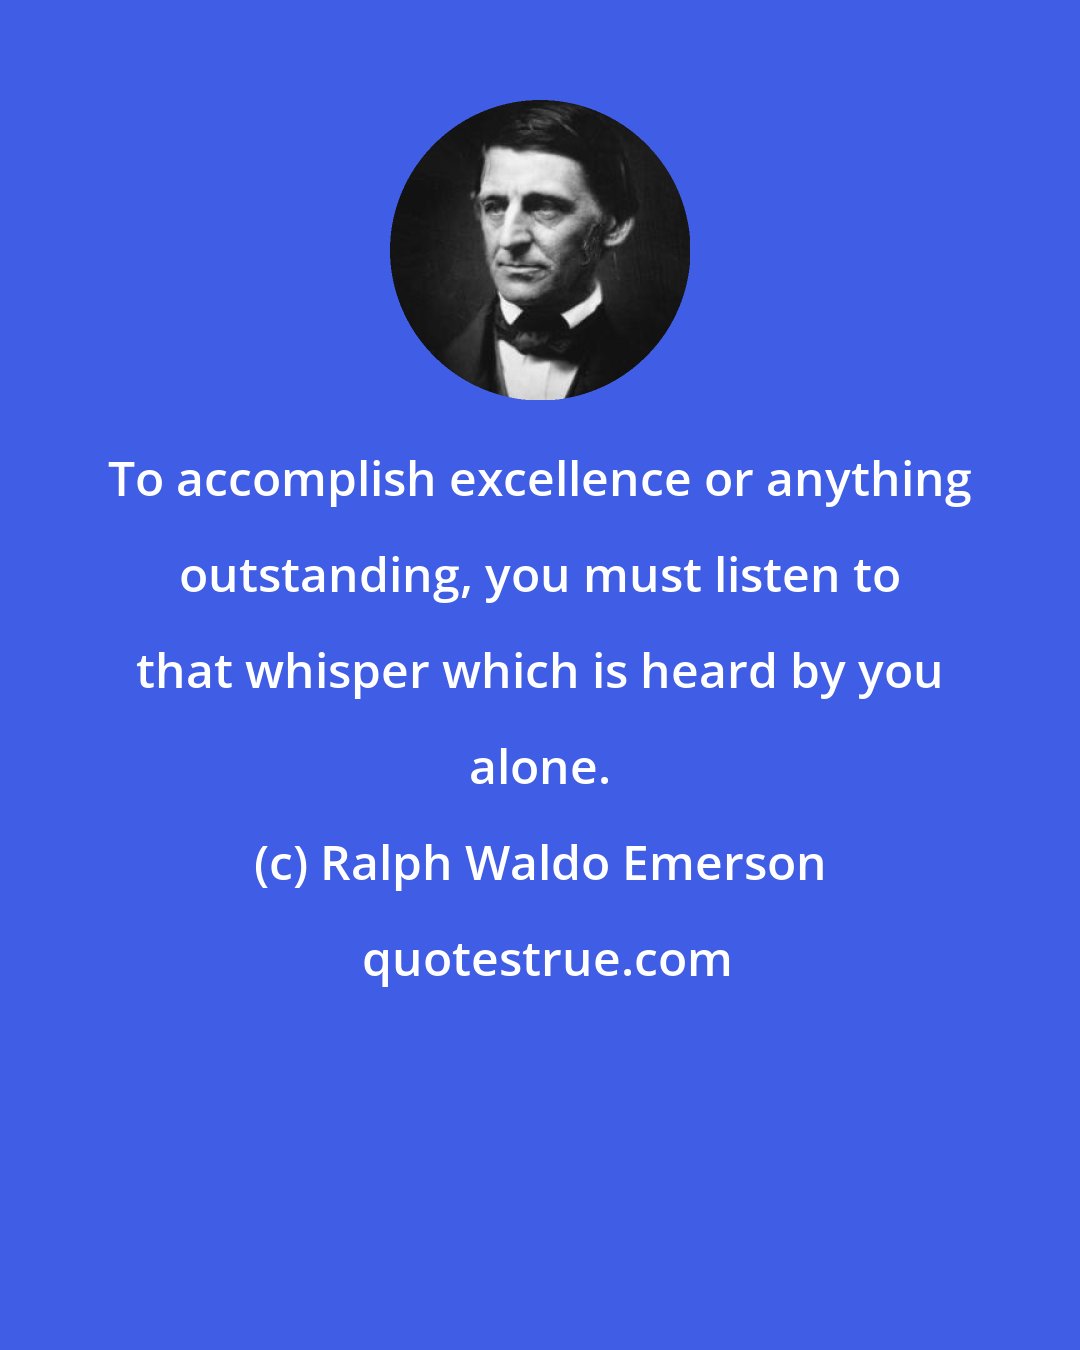 Ralph Waldo Emerson: To accomplish excellence or anything outstanding, you must listen to that whisper which is heard by you alone.